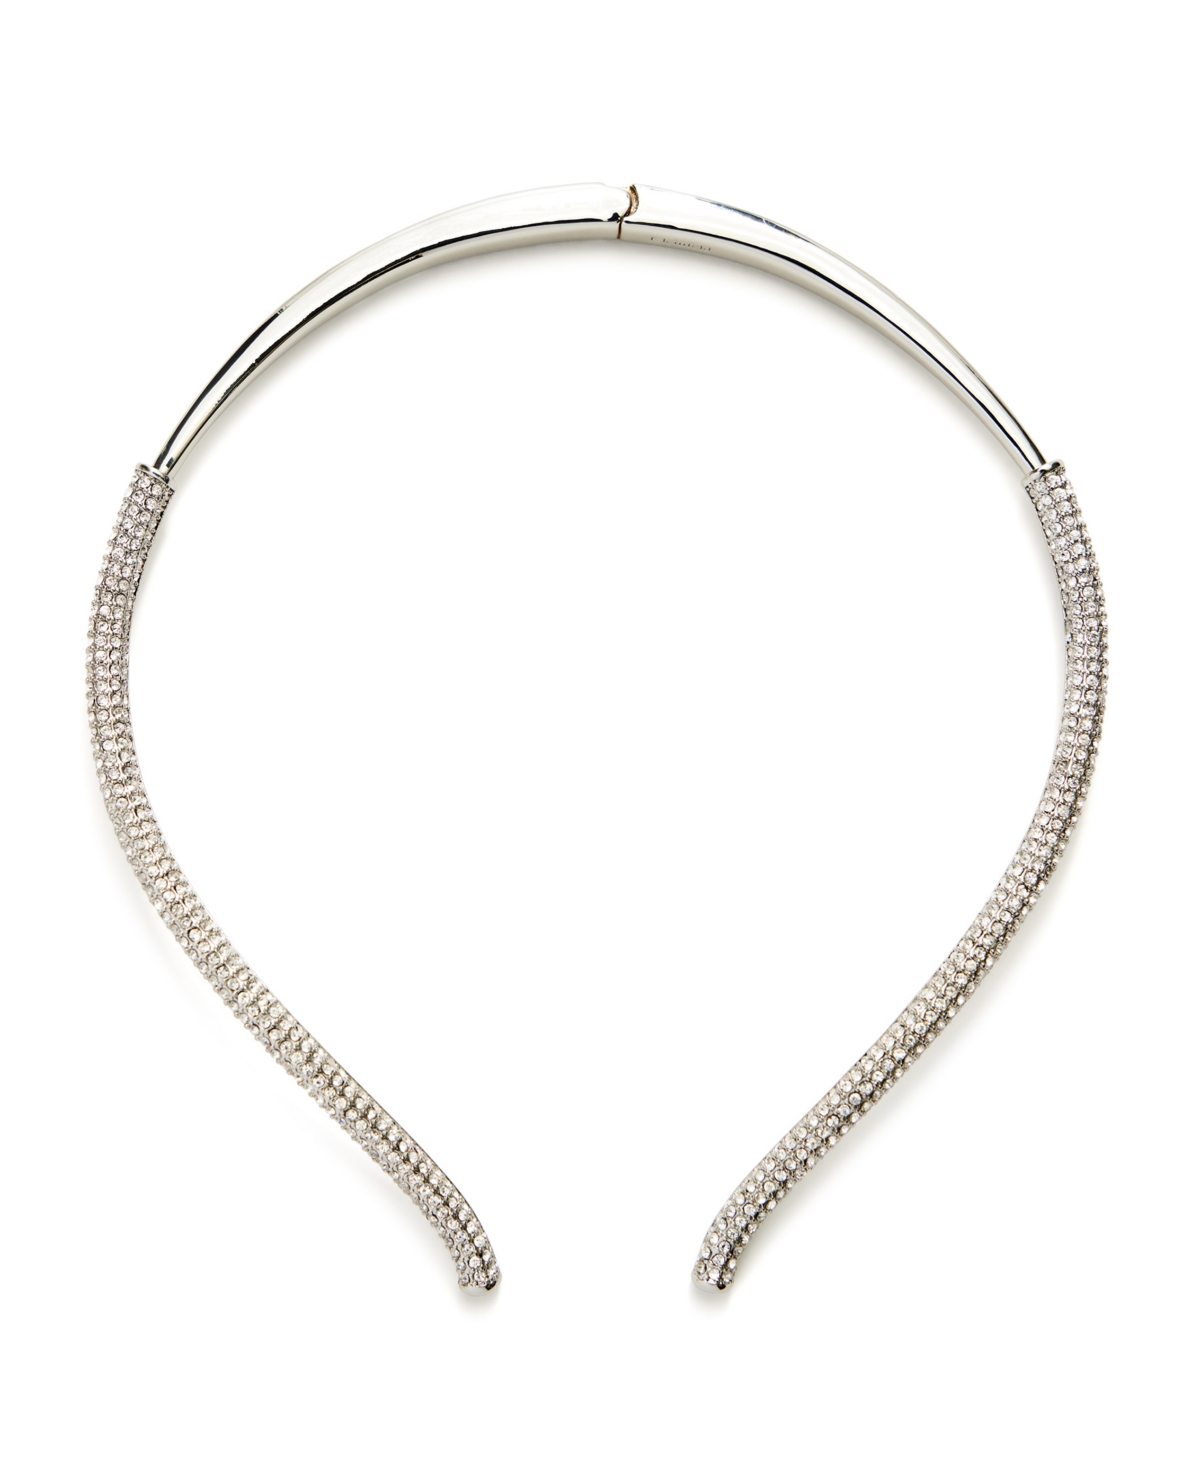 Faux Stone Pave Hinged Collar Necklace - Crystal, Gold